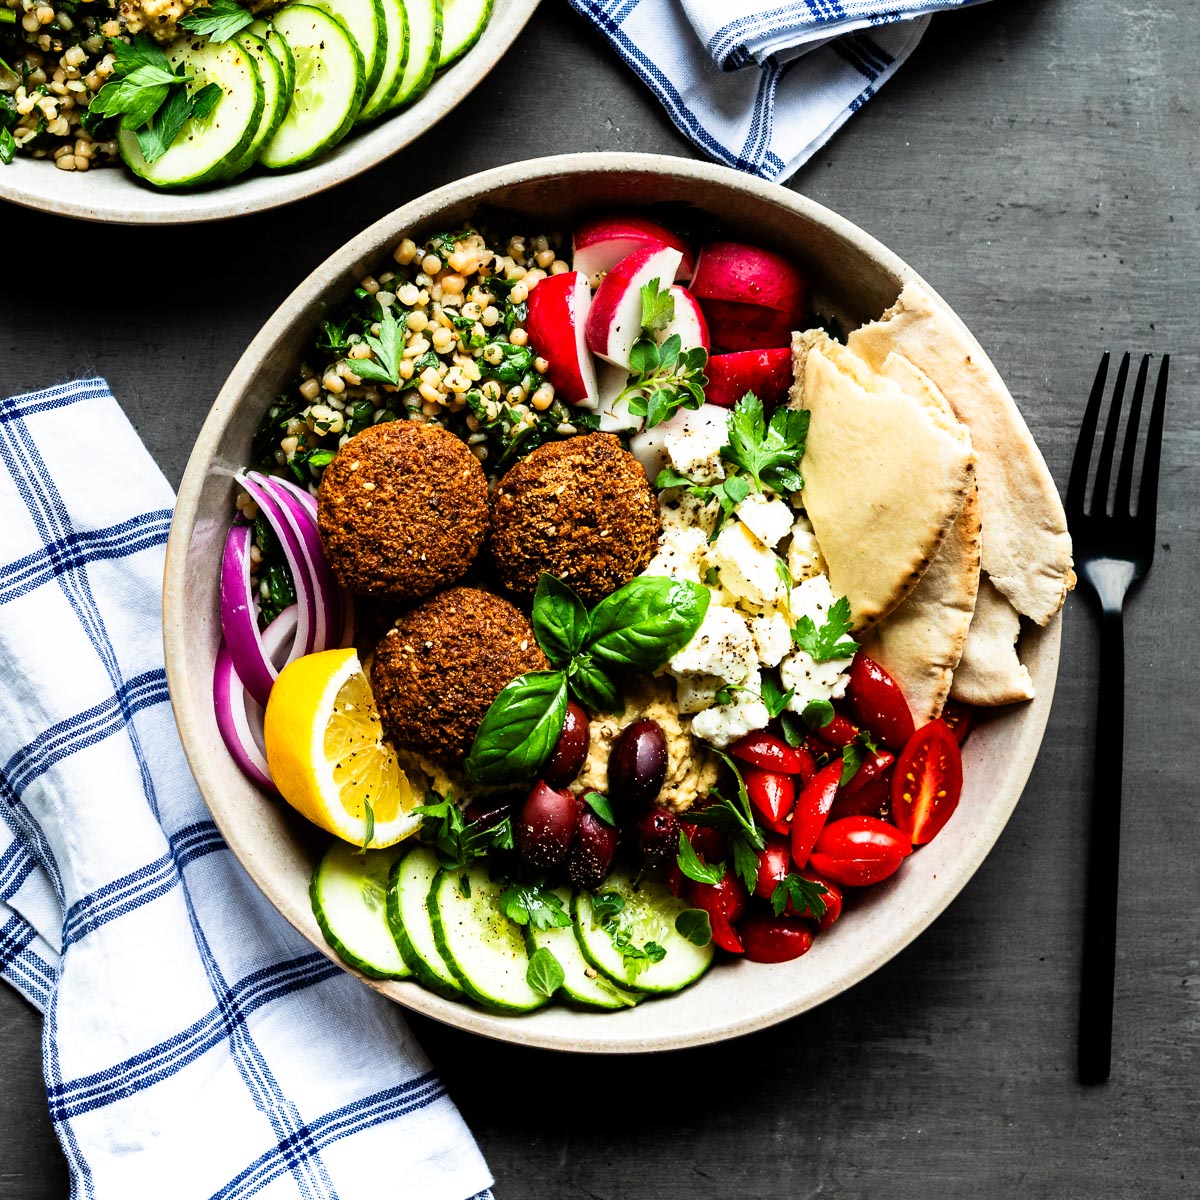 Mediterranean falafel bowl with fresh ingredients in a ceramic bowl on a concrete counter top.